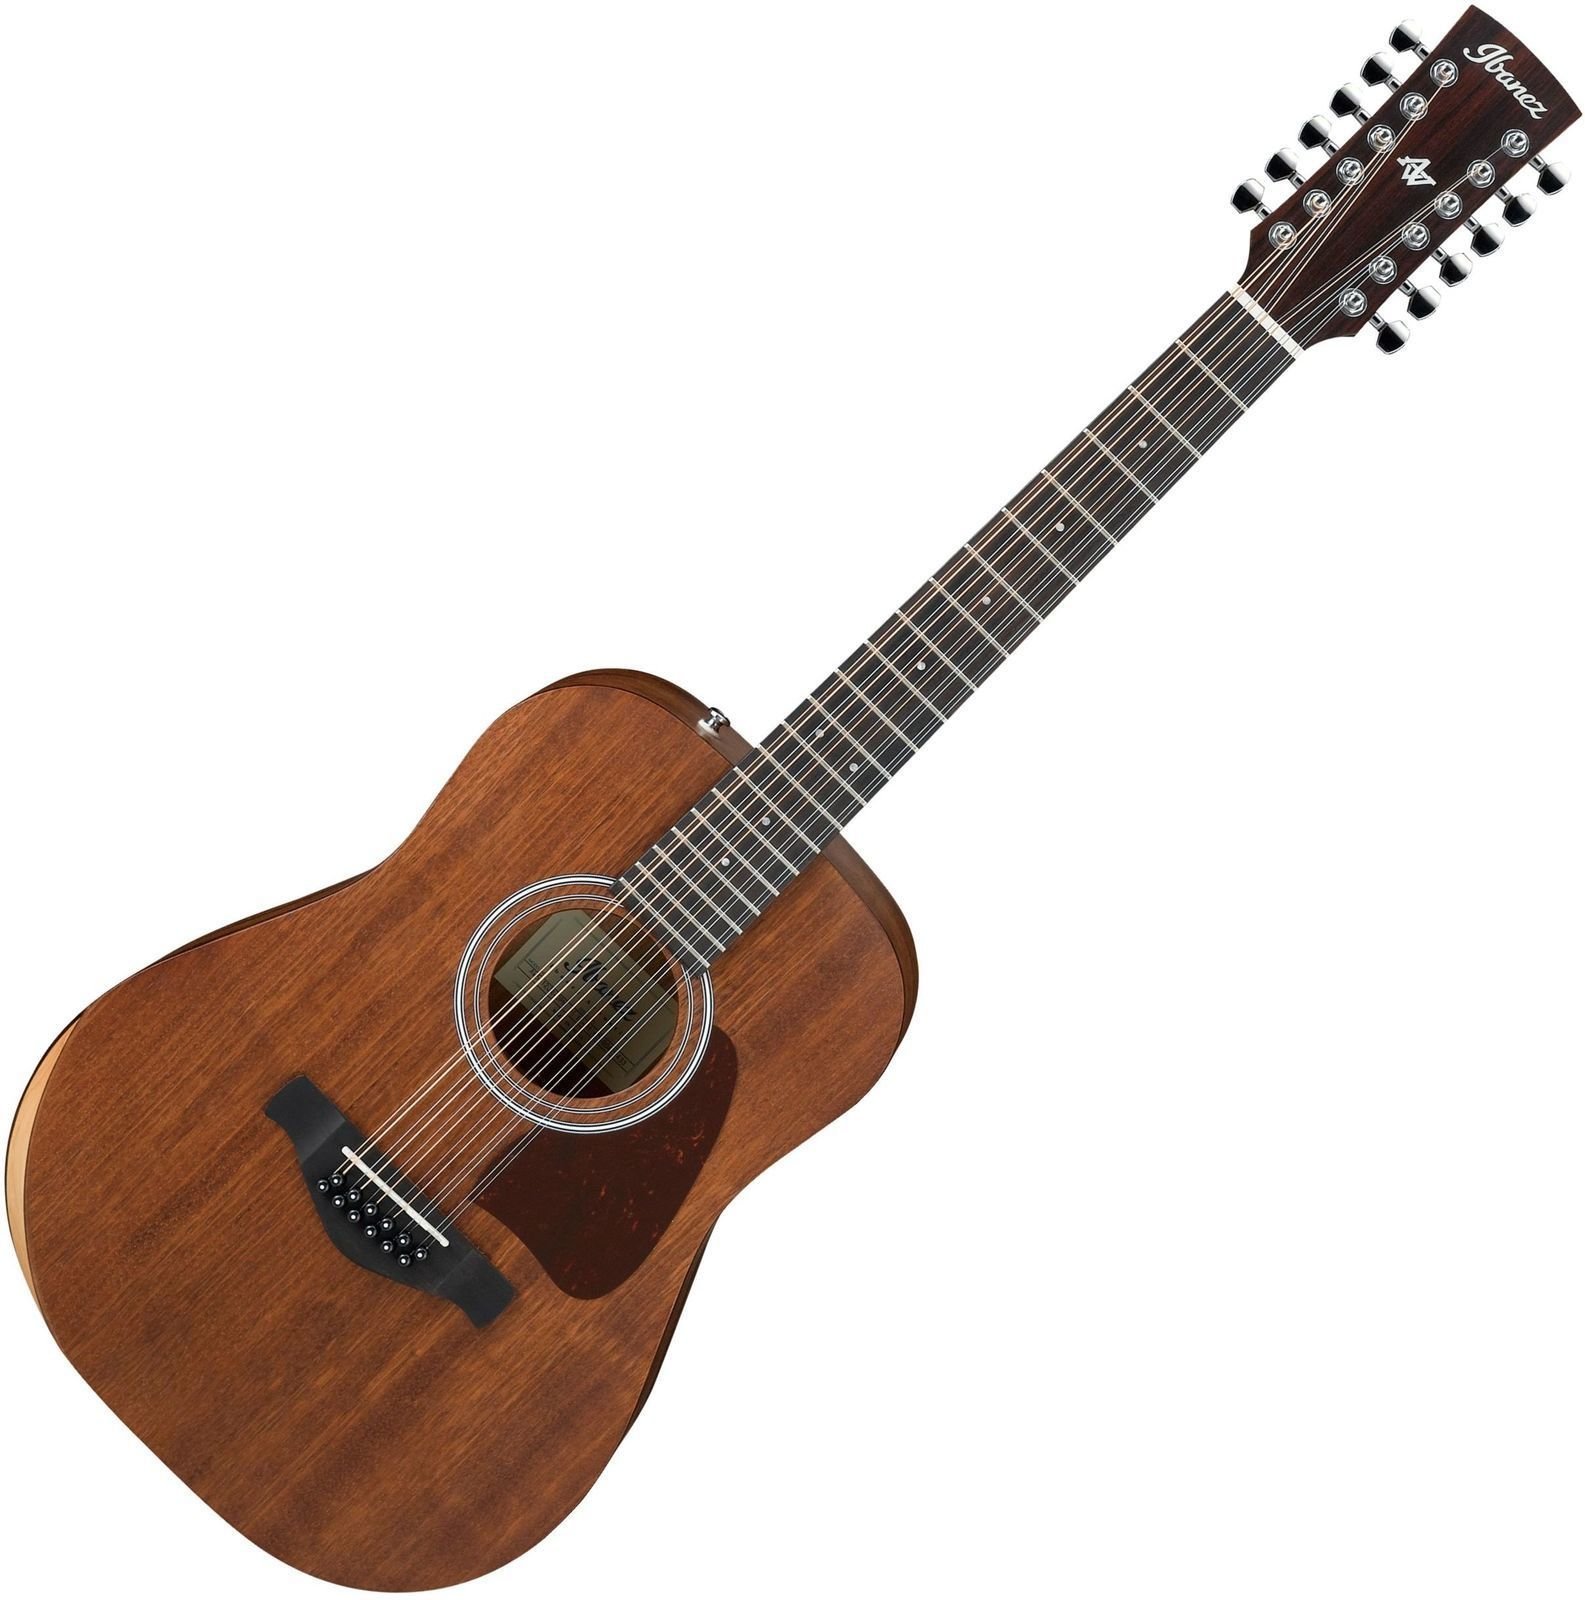 12-String Acoustic Guitar Ibanez AW5412JR Open Pore Natural